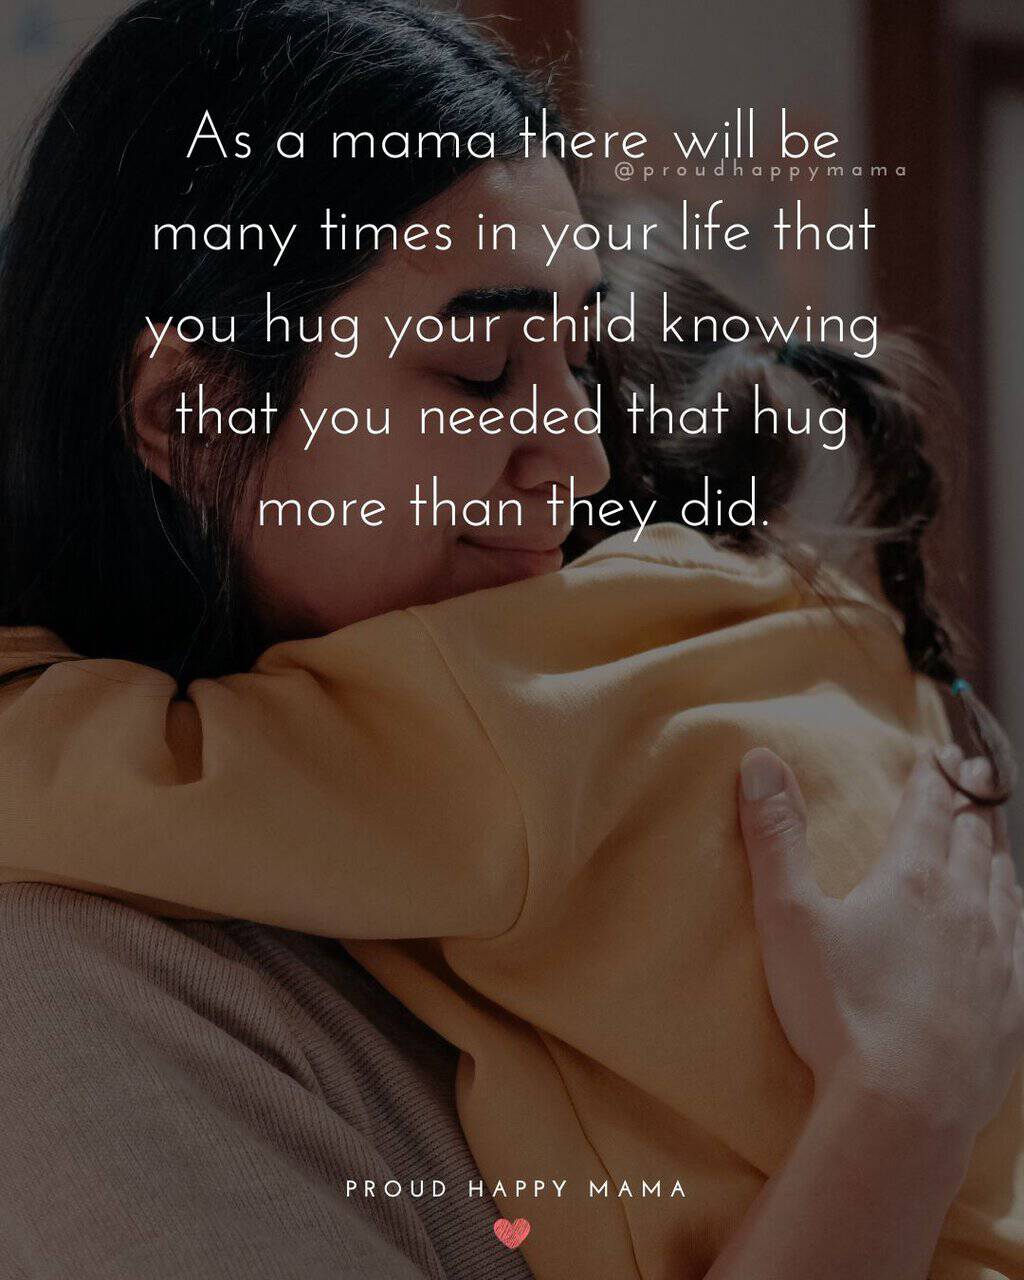 hugging child quote - as a mama there will be many times in your life that you hug your child knowing that you needed that hug more than they did.